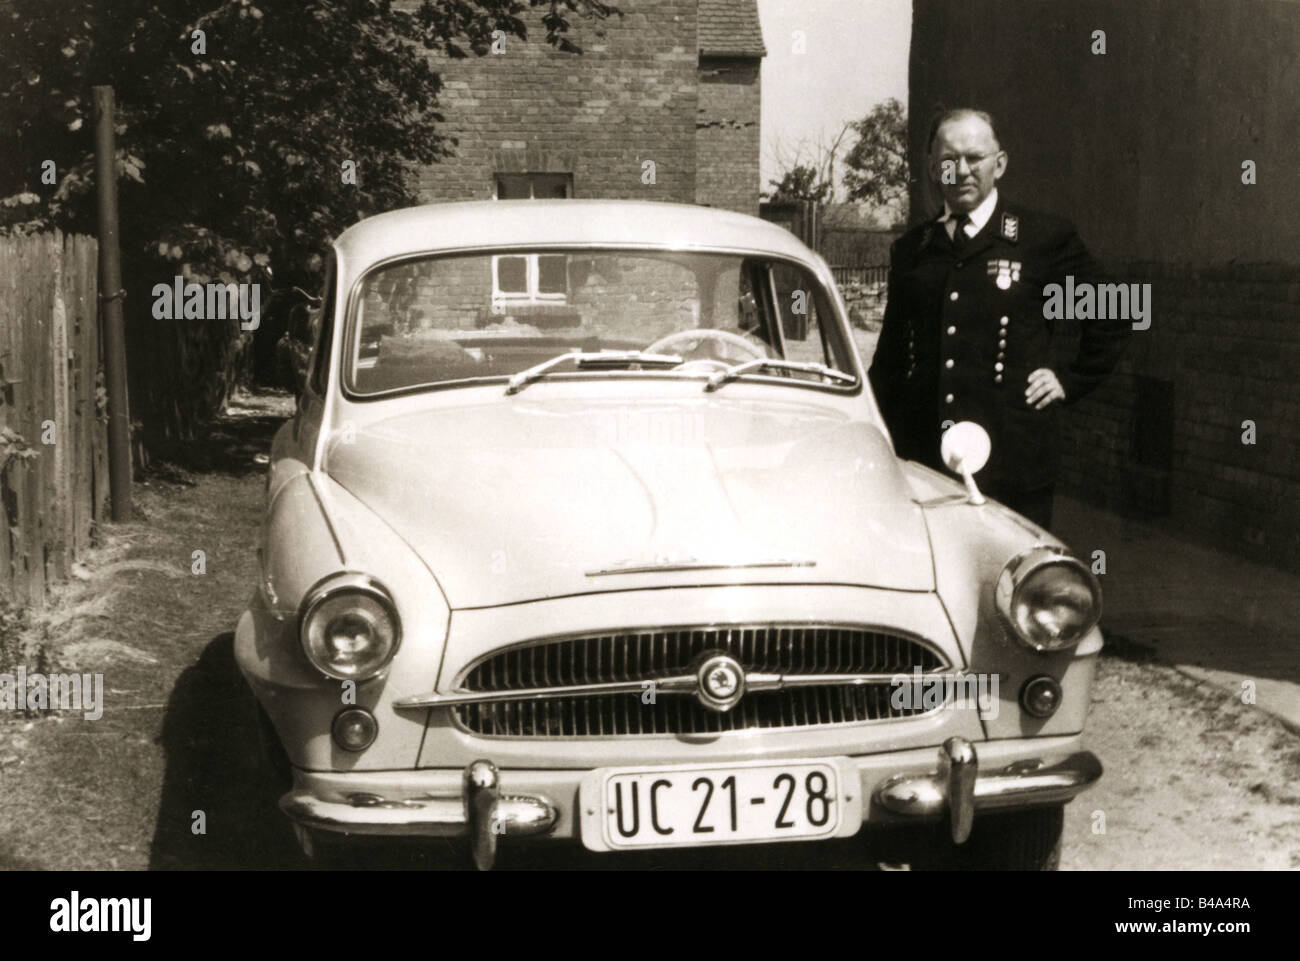 transport/transportation, cars, Czechoslovakia, Skoda 445, 1957 - 1959, car owner in the Leipzig district, East Germany, GDR, CSSR, 20th century, historic, historical, people, 1950s, Stock Photo